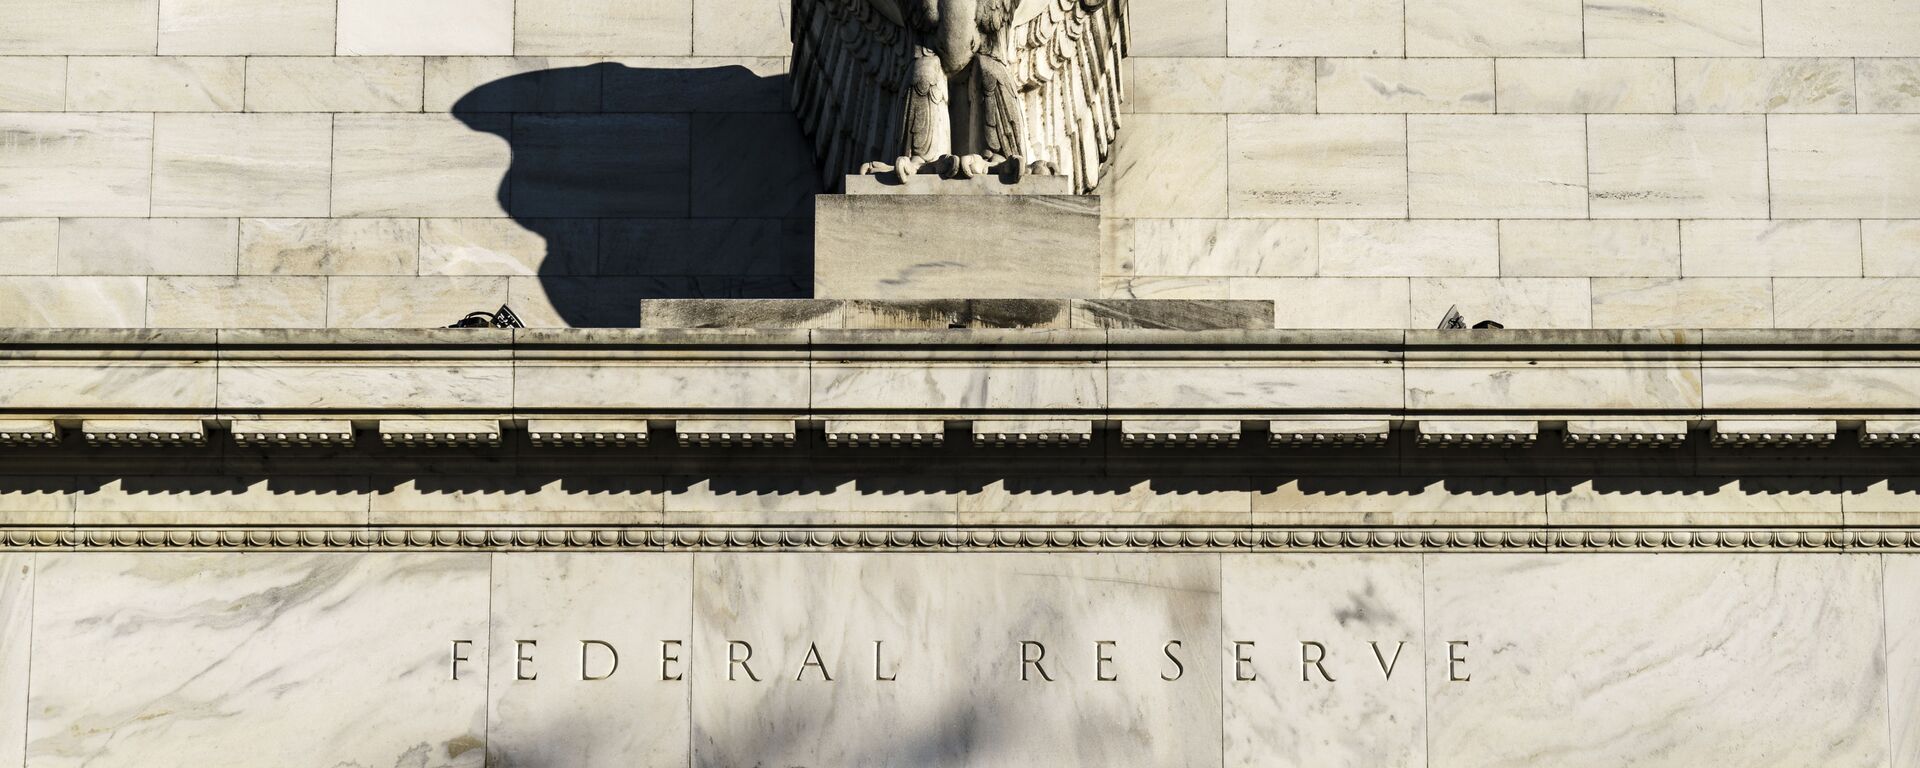 The Federal Reserve is seen in Washington, Monday, Nov. 16, 2020. President Donald Trump's unorthodox choice for the Federal Reserve Board of Governors, Judy Shelton, could be approved by the Senate this week, according to Majority Leader Mitch McConnell's office. - Sputnik International, 1920, 12.12.2023